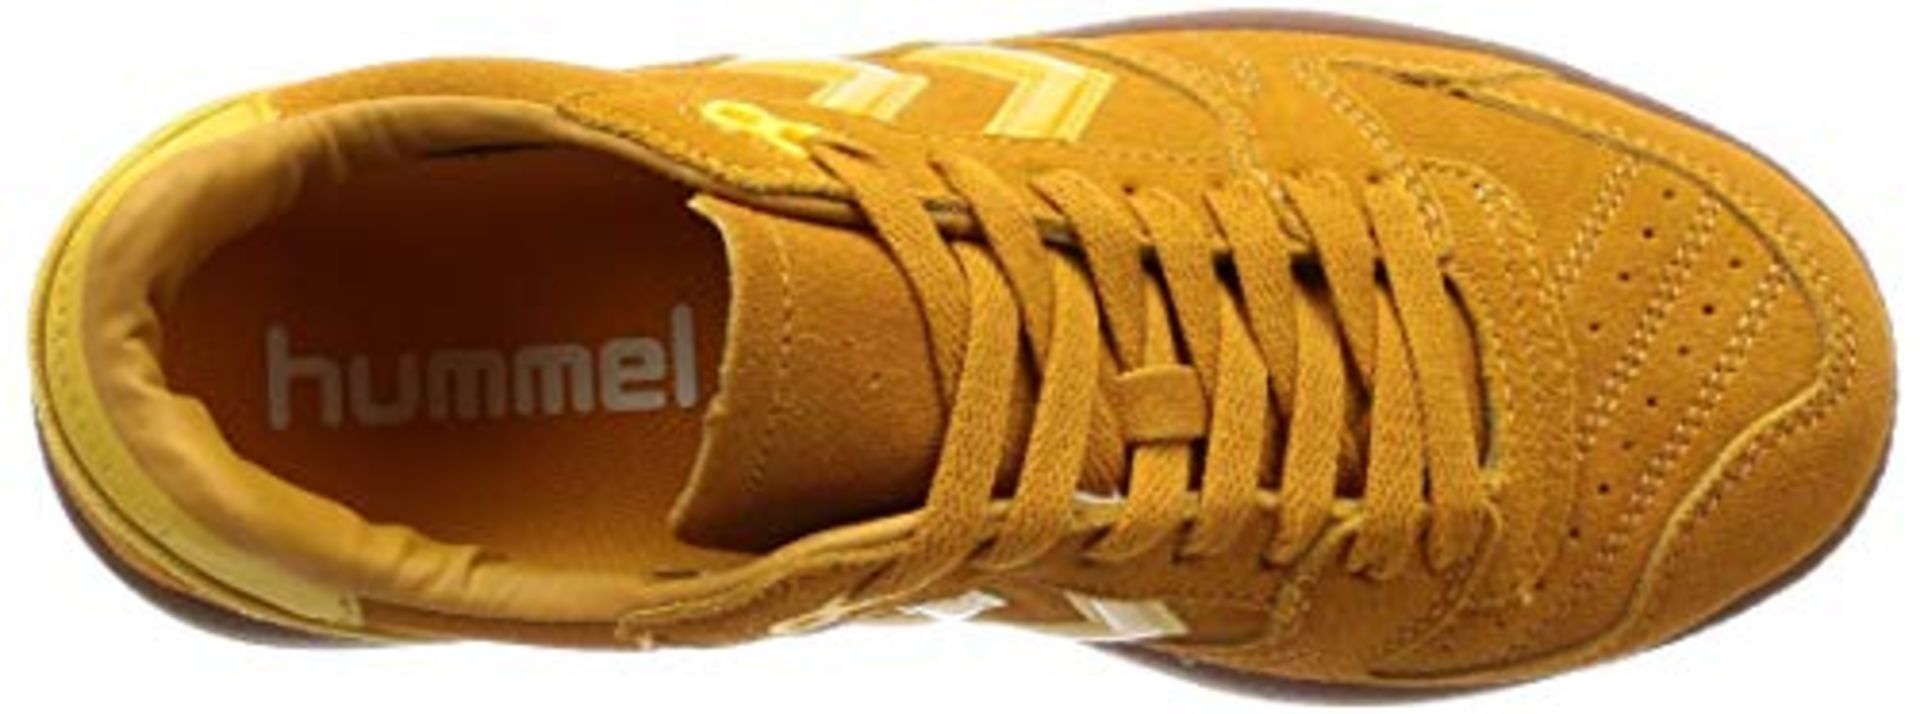 1 x Hummel Chaussures HB team HM201937 | EAN: 5700494865790 - Image 5 of 7